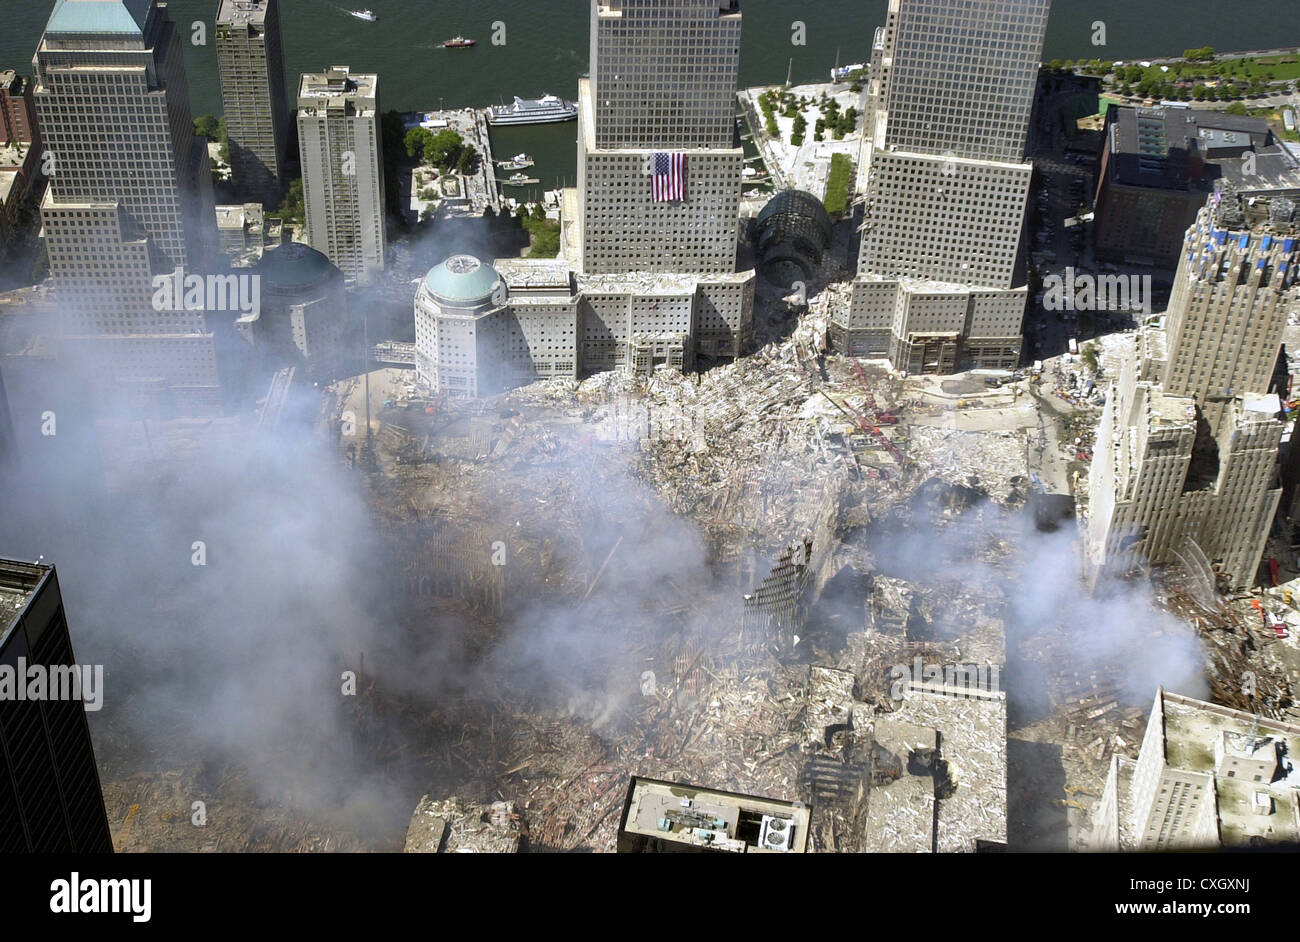 An aerial view of the destruction by terrorists of the World Trade Center September 15, 2001 in New York City. The view is to the west, with an American flag draped on one of the World Financial Center towers. The Hudson River is in the background. Stock Photo